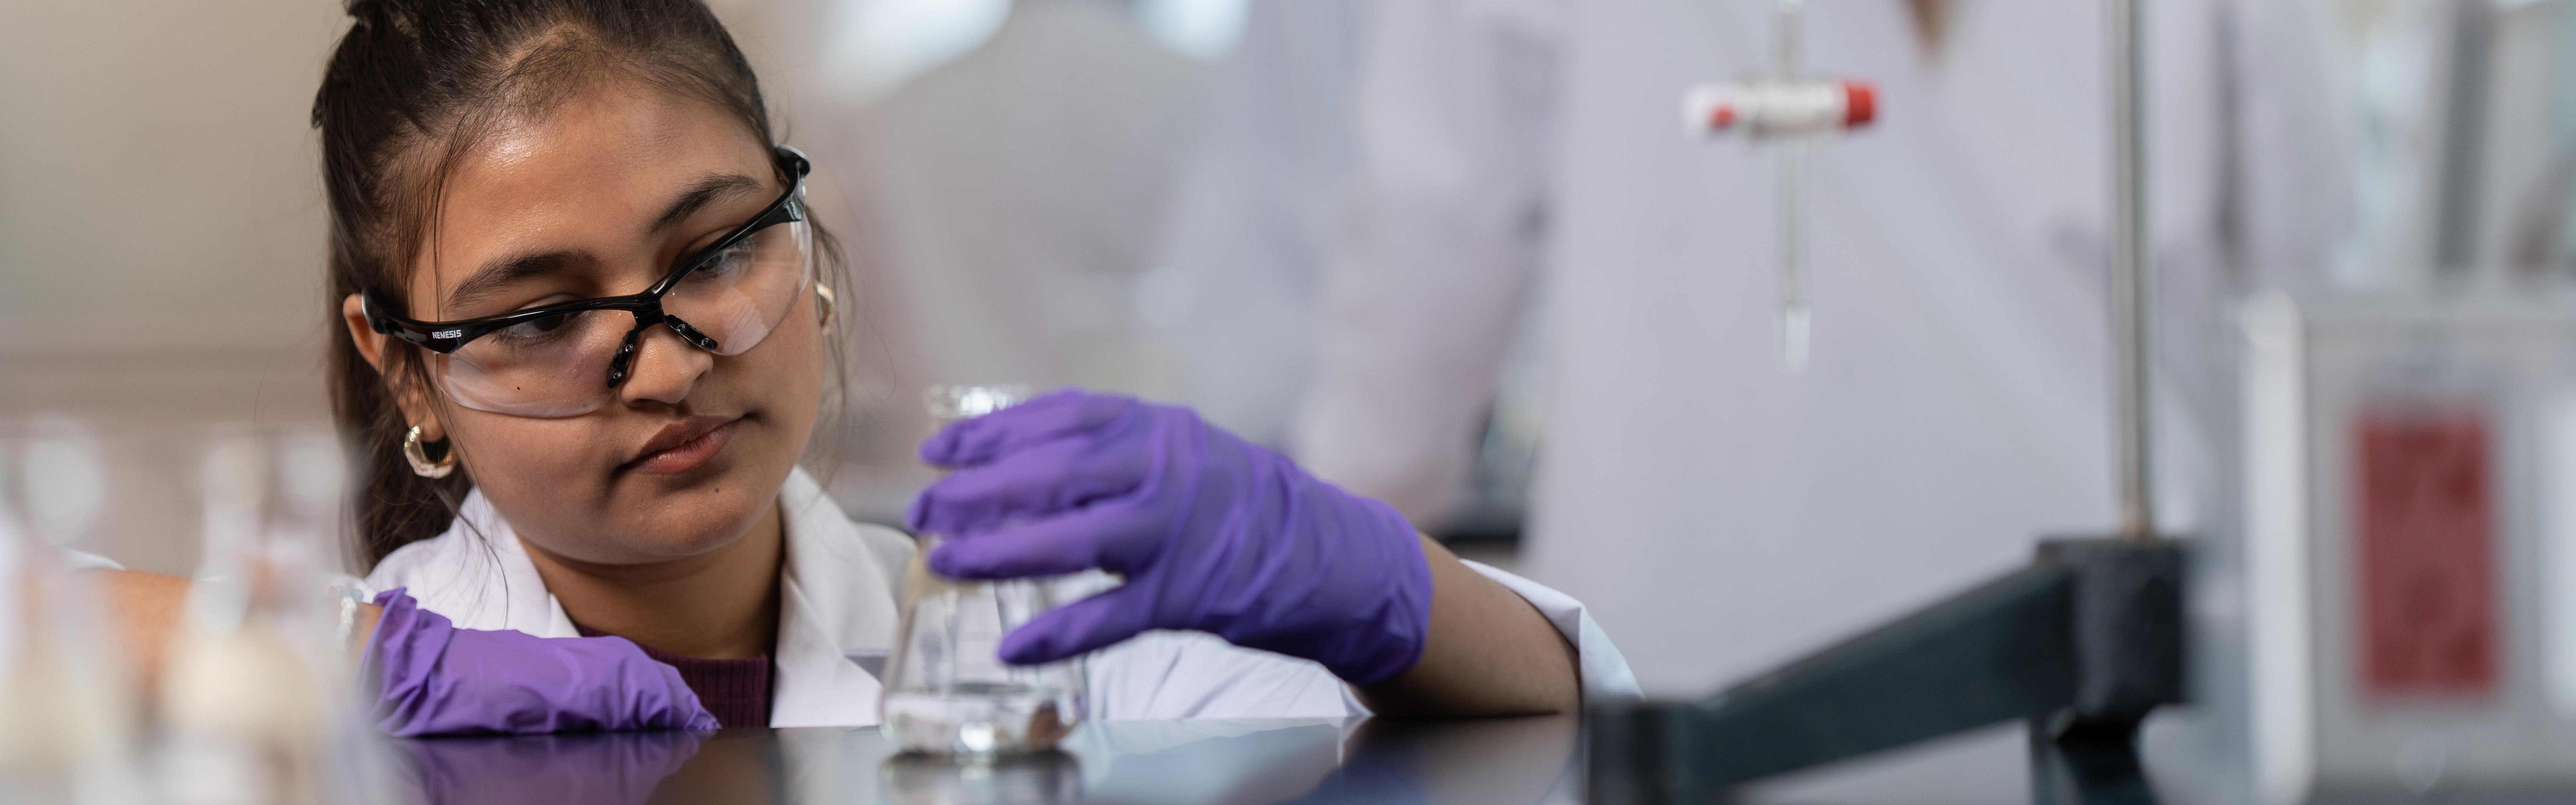 A female student with a purple lab glove on examining a beaker